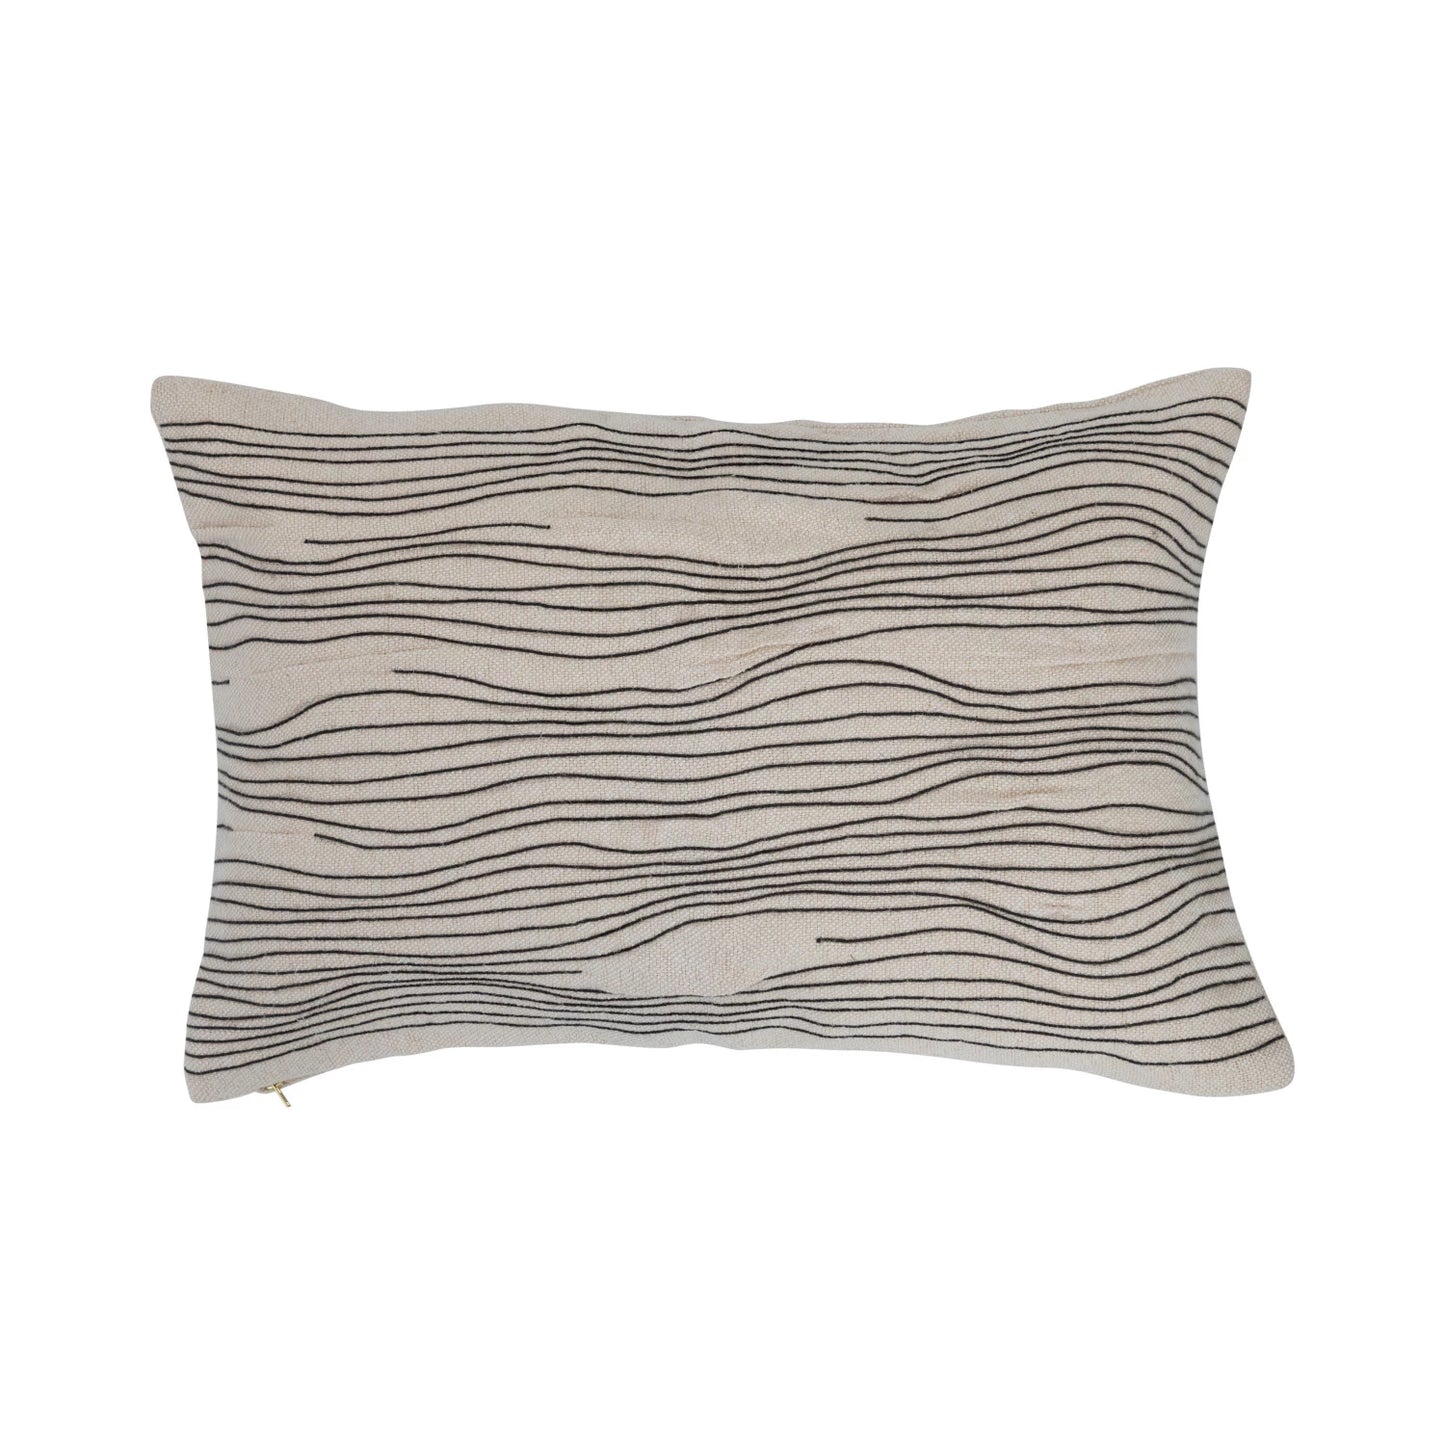 Embroidered Lines Pillow, The Feathered Farmhouse